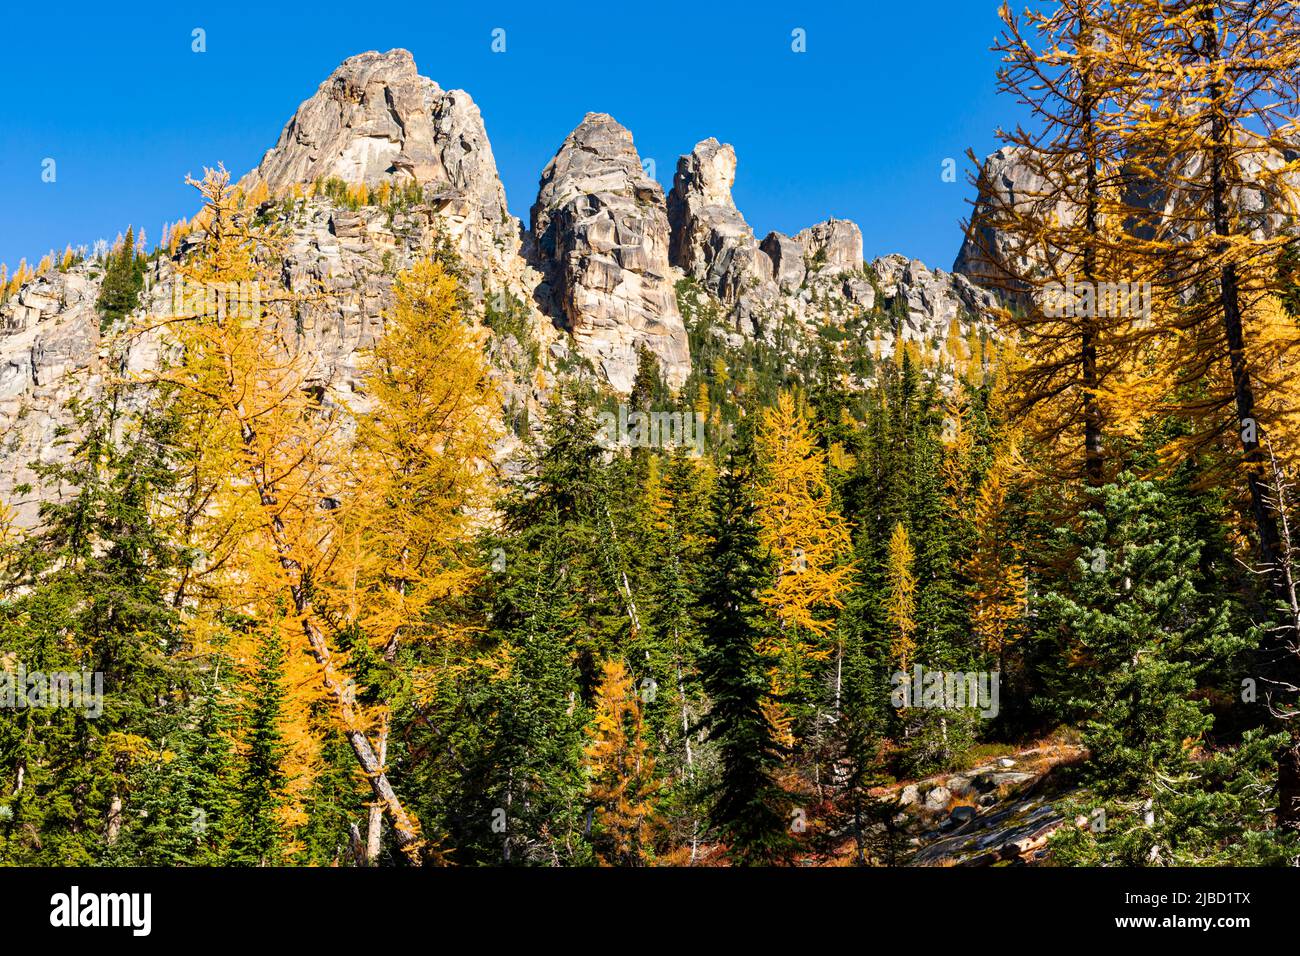 WA21628-00...WASHINGTON - Alpine larch in fall colors brightening the basin below Liberty Bell Mountain and the Early Winter Spires in the Okanogan - Stock Photo